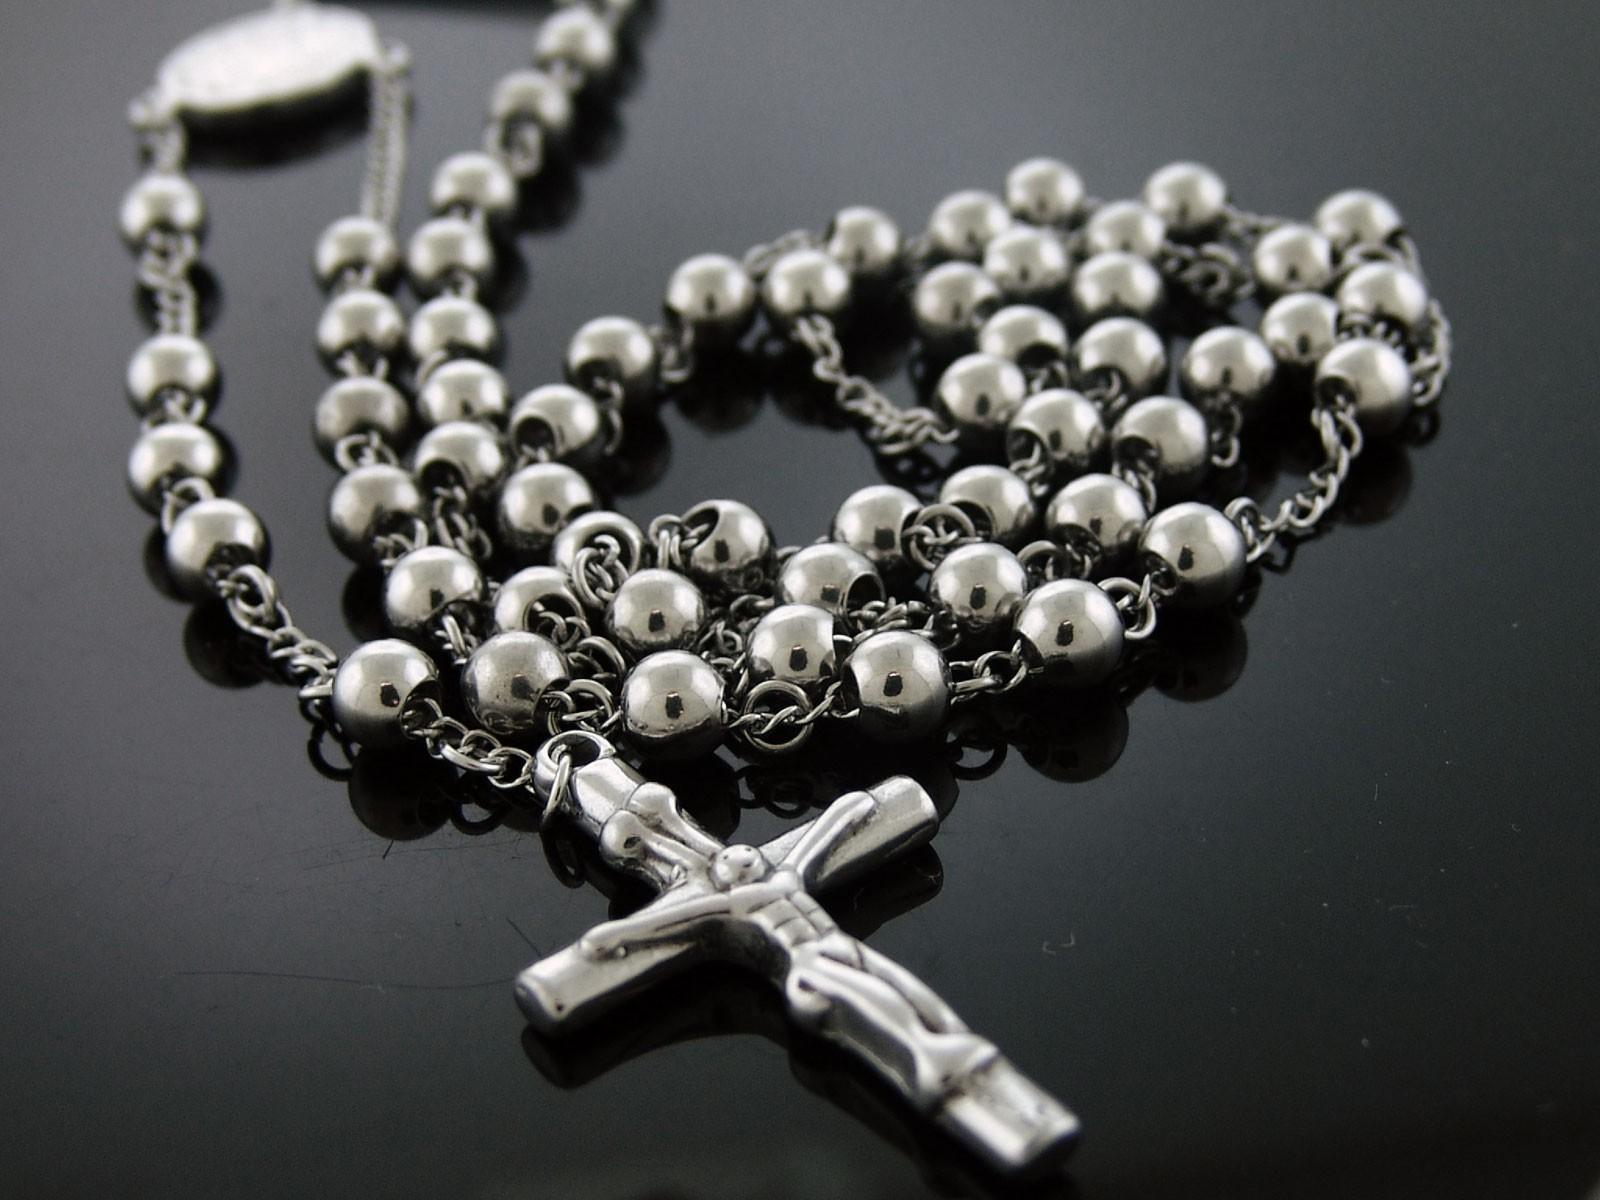 Rosary Stock Photos and Images. 17,955 Rosary pictures and royalty free  photography available to search from thousands of stock photographers.